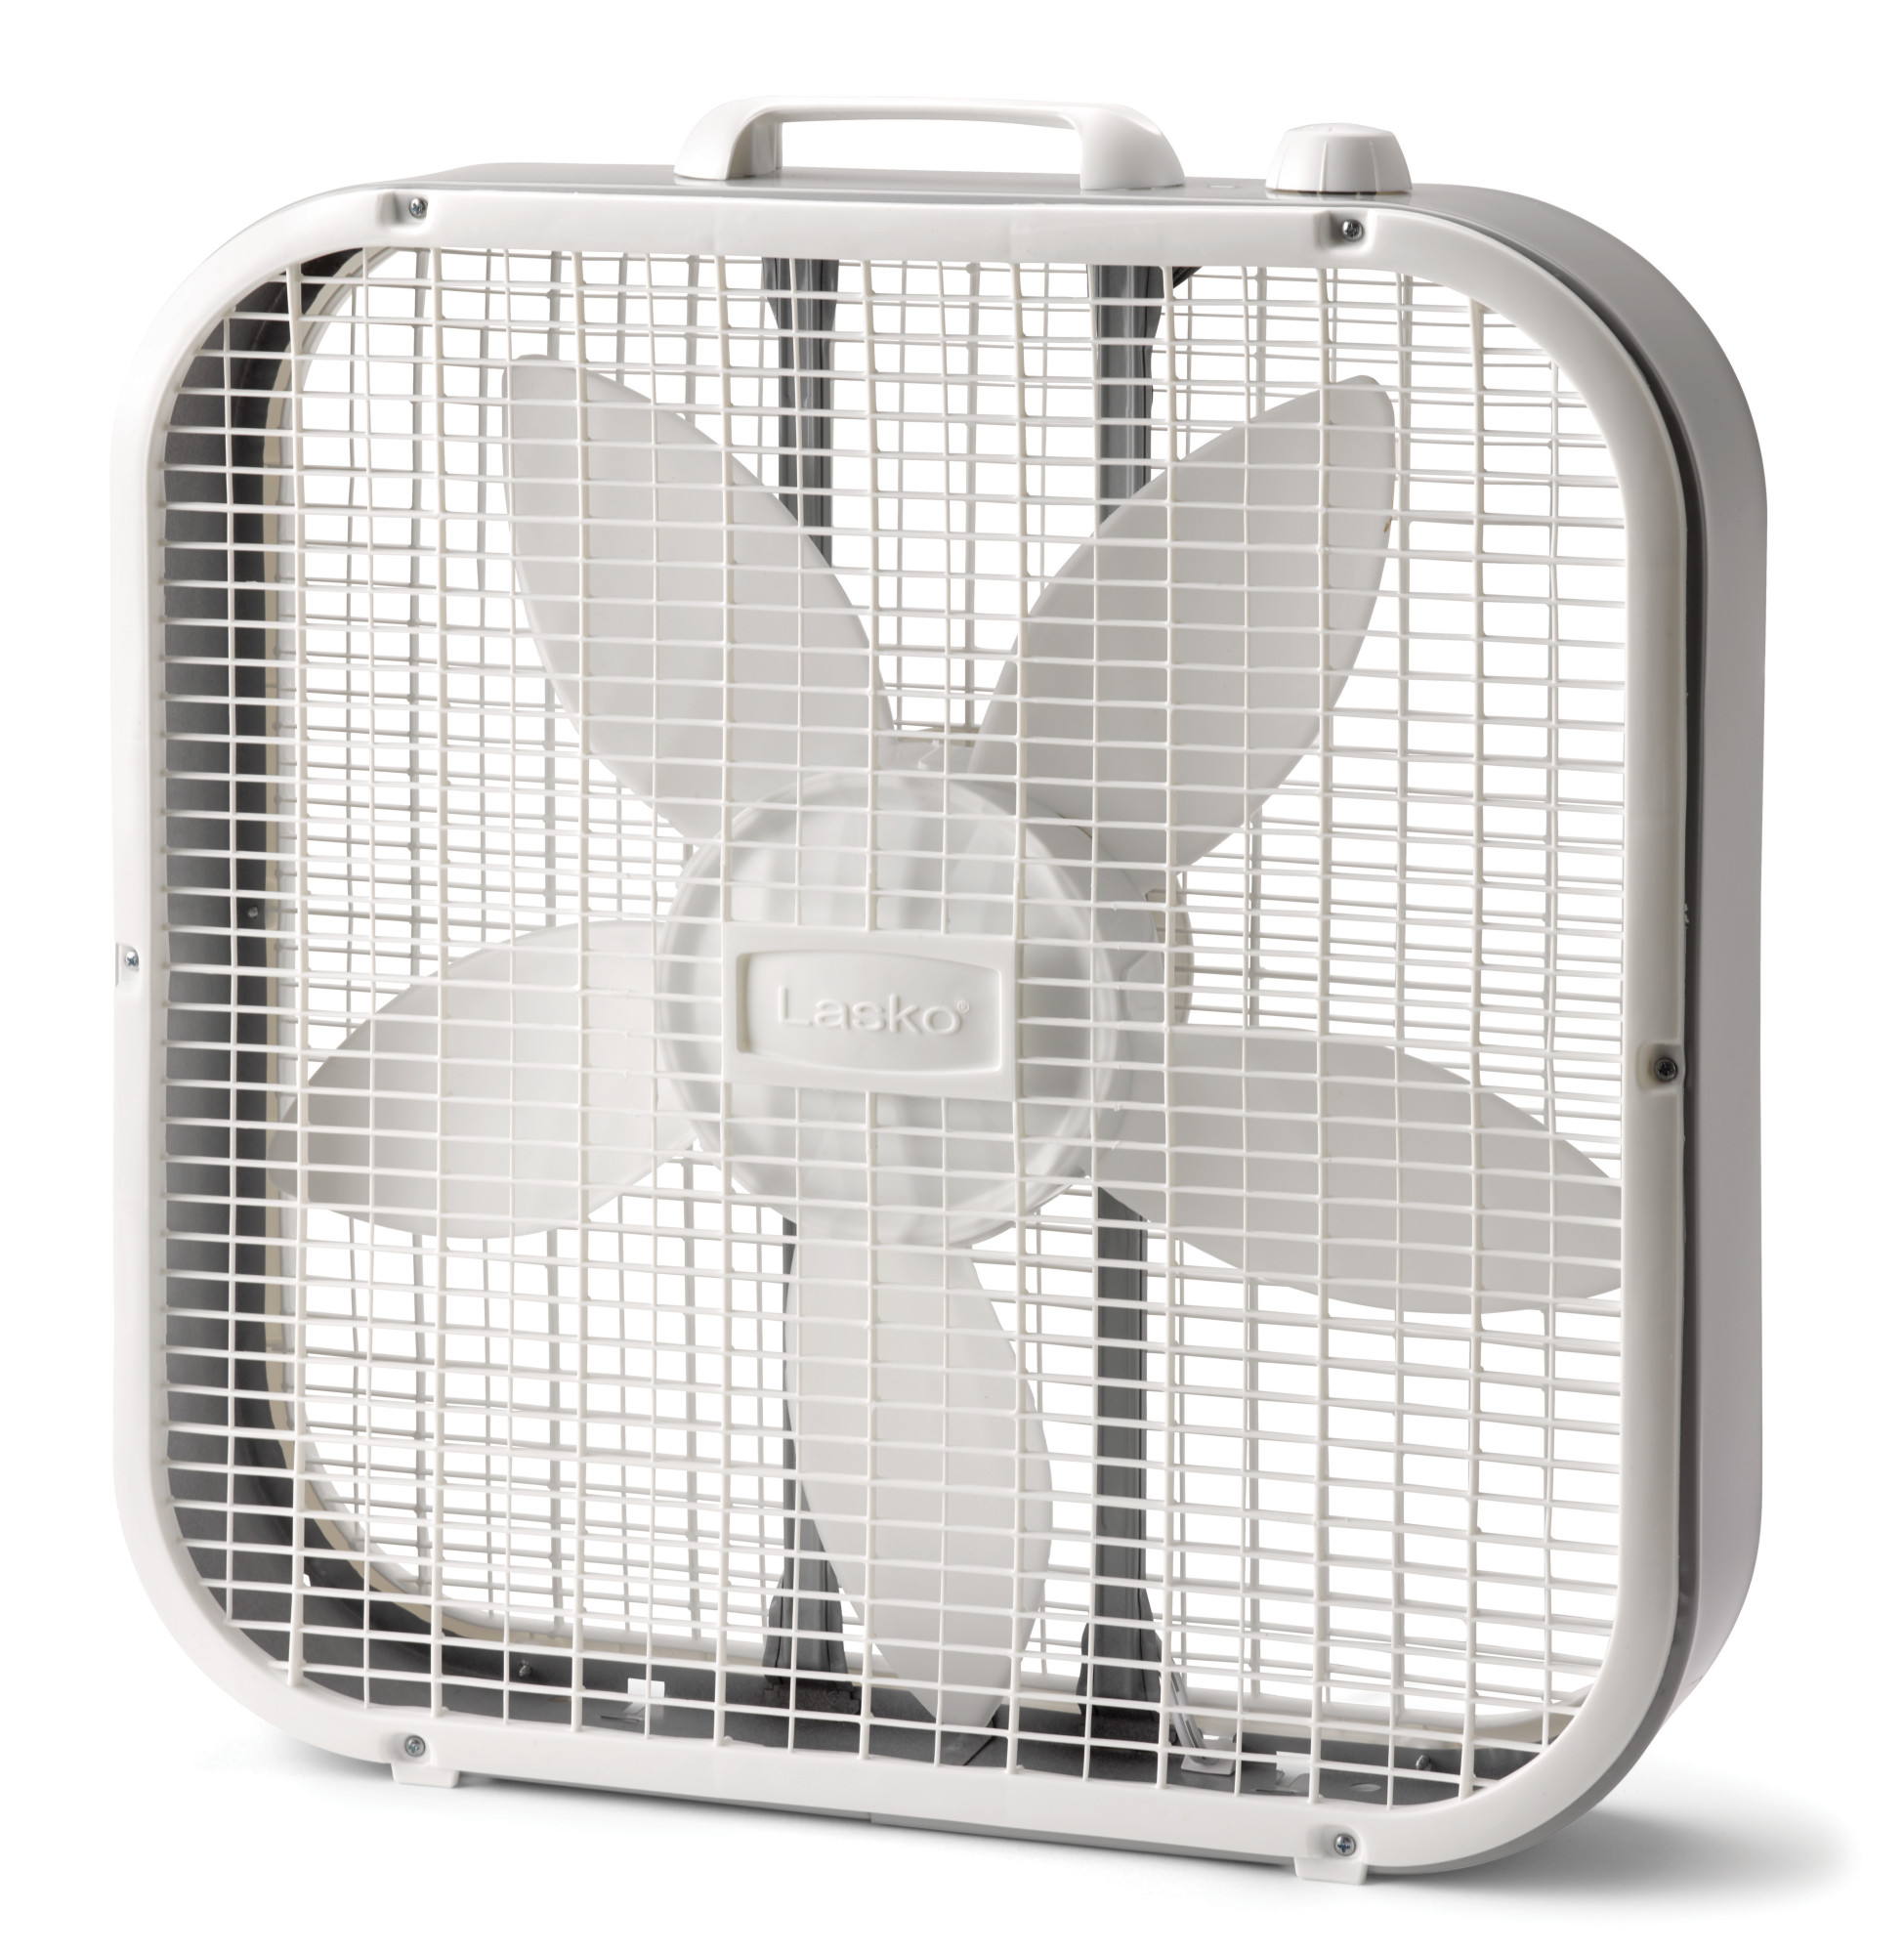 Lasko 20" Classic Box Fan with Weather-Resistant Motor, 3 Speeds, 22.5" H, White, B20200, New - image 1 of 7